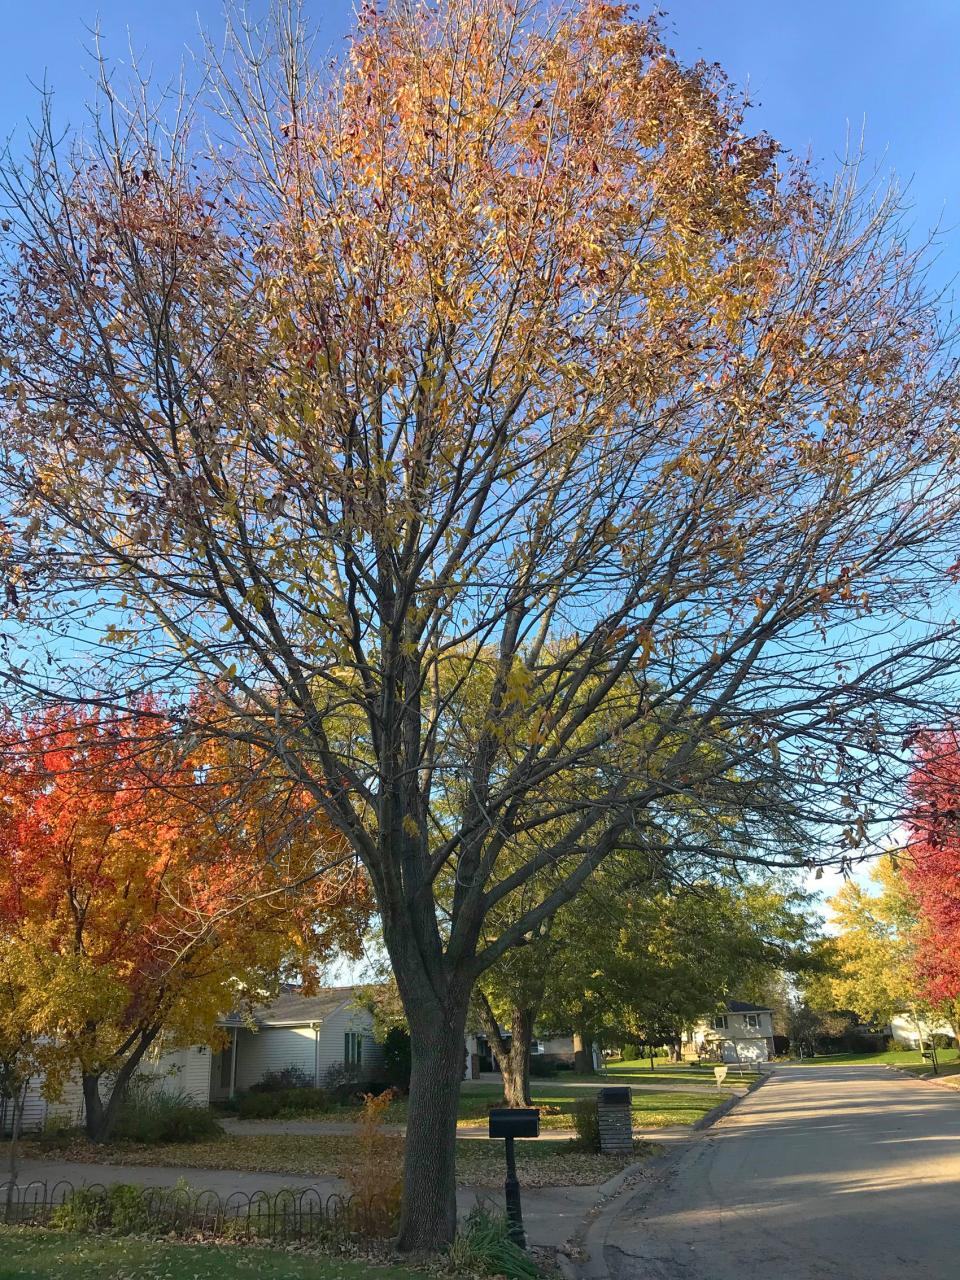 Arborist Charlie Goodrich says this white ash in a yard just northwest of Rotary Park is one of the few ash trees that has survived the emerald ash borer.